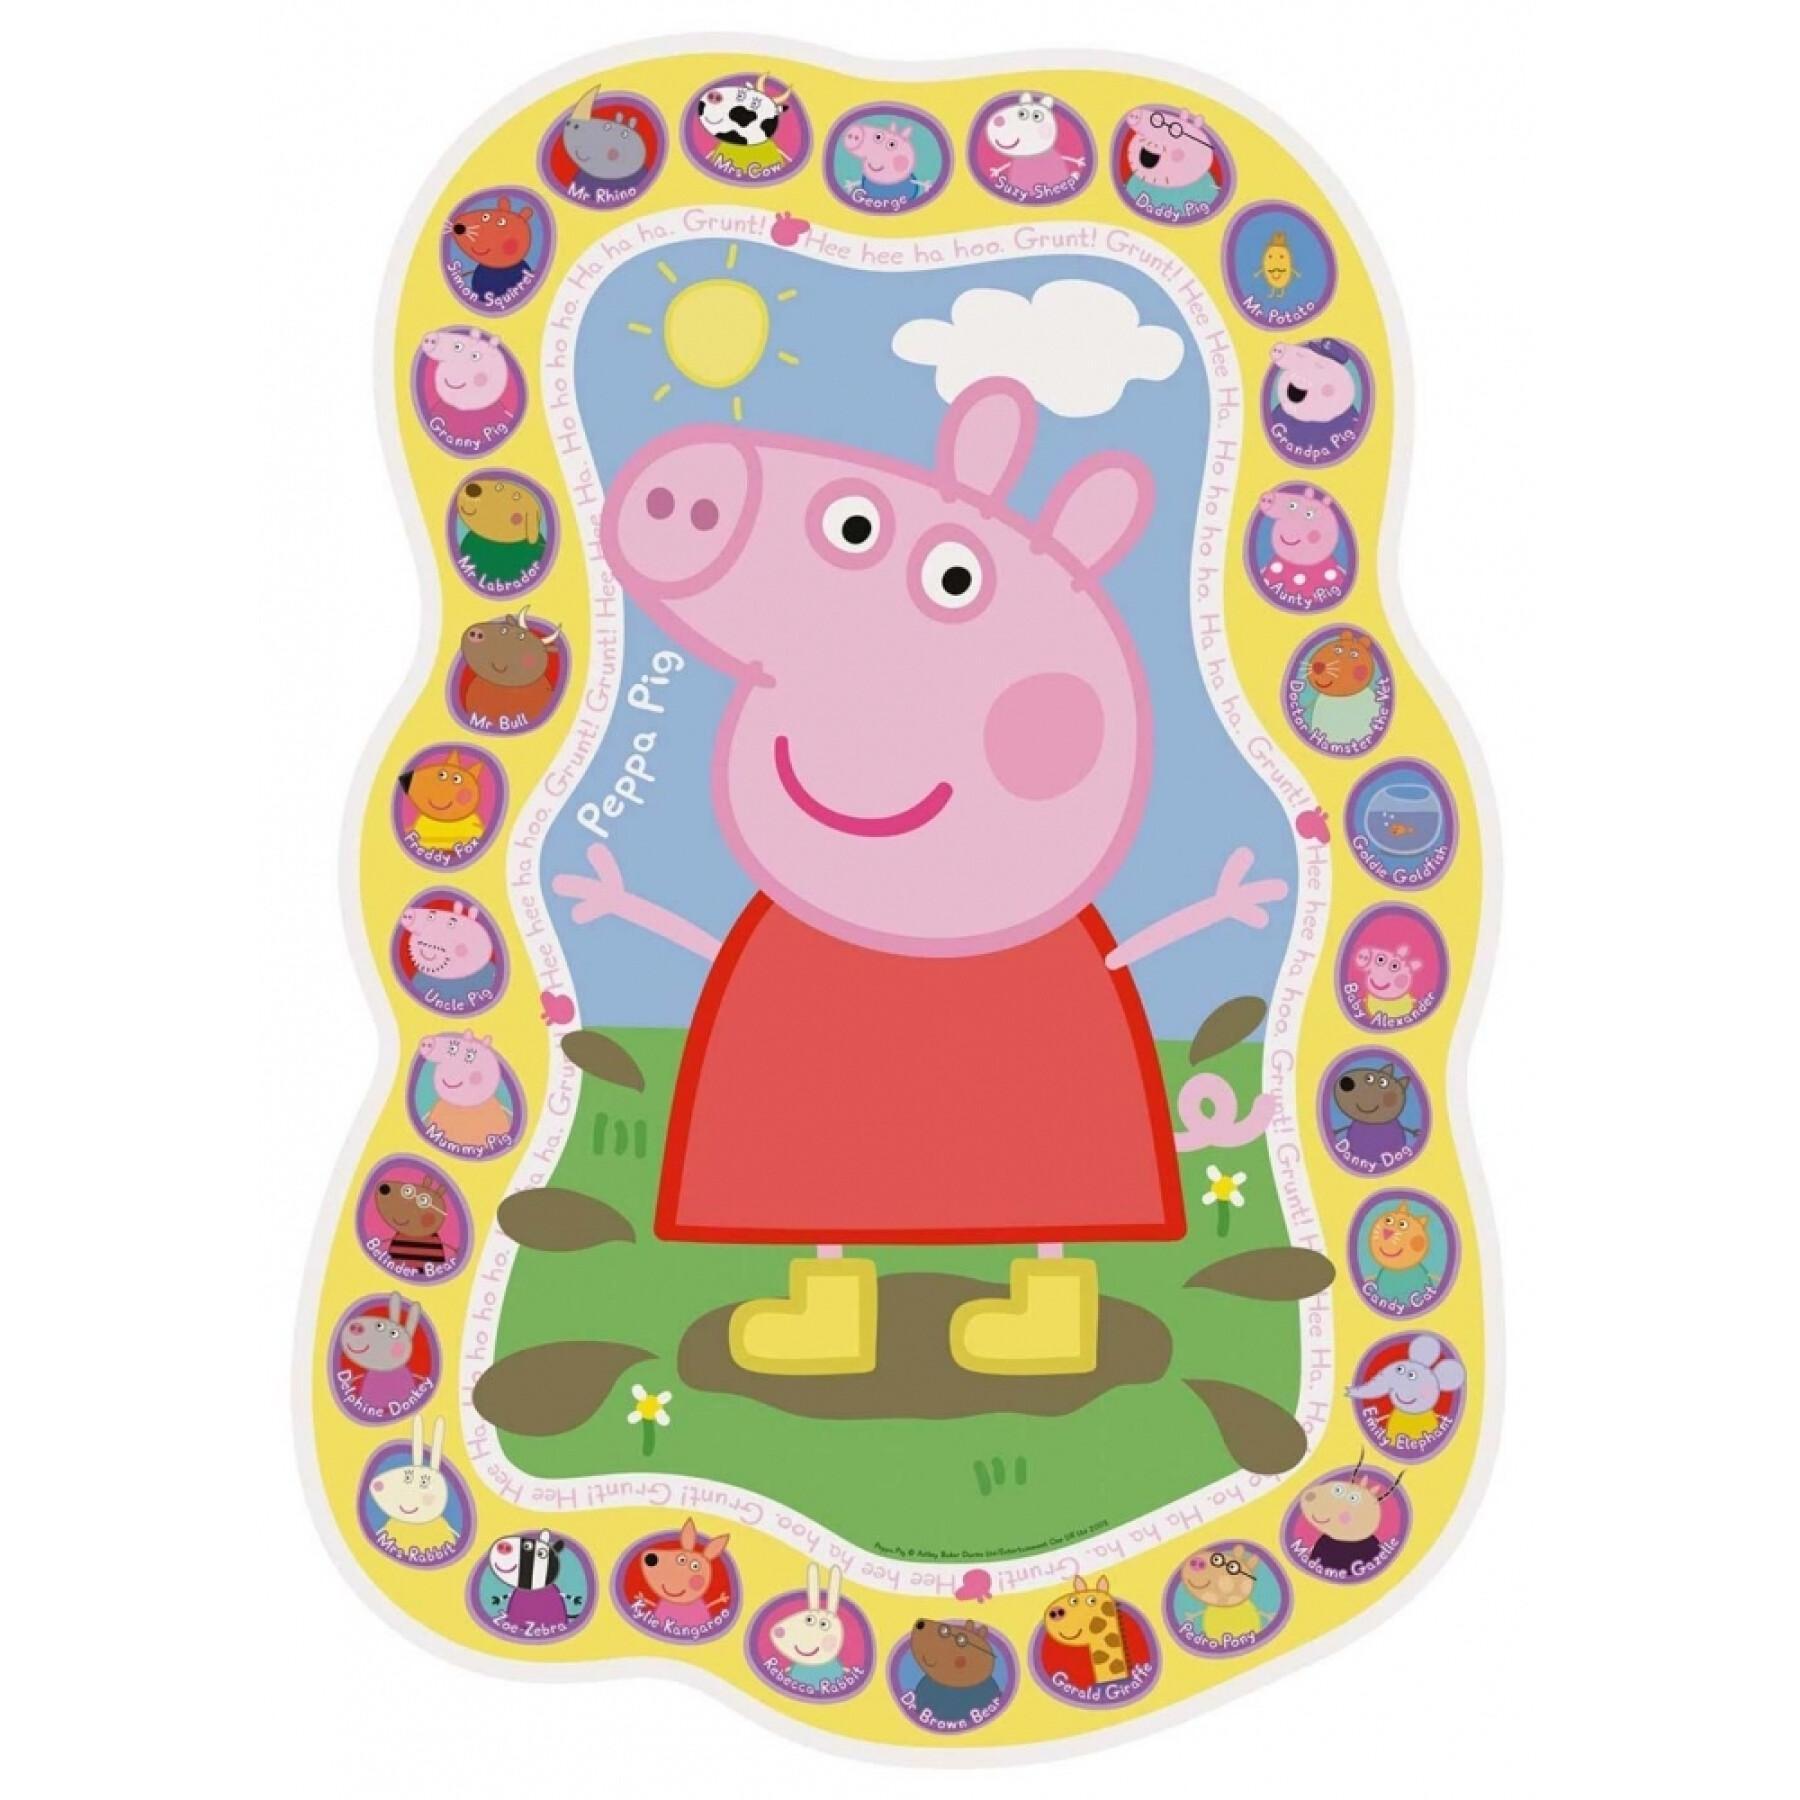 Puzzle of 24 pieces of floor Peppa Pig